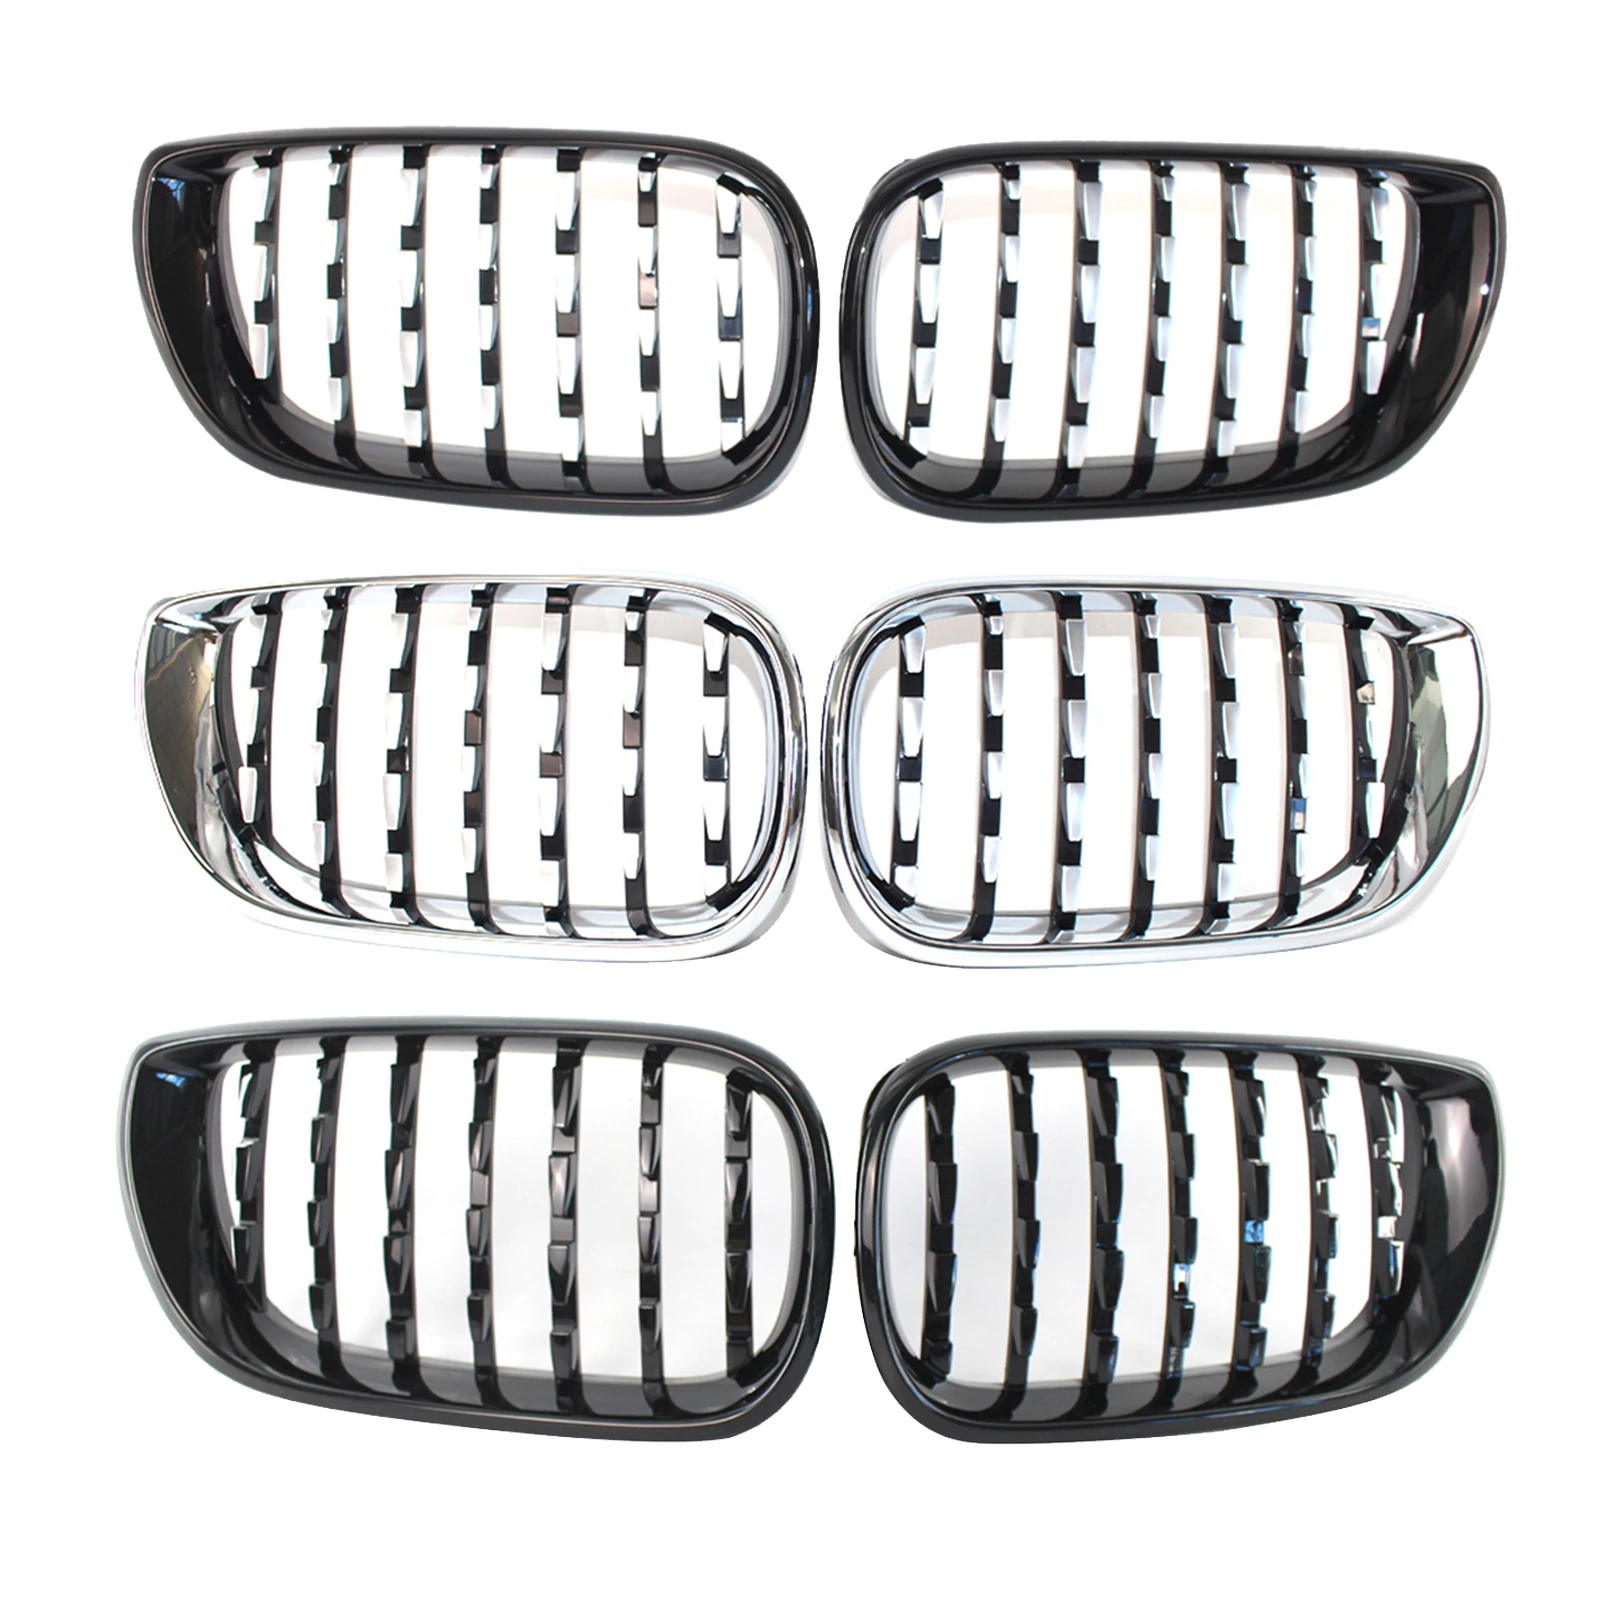 1 Pair of Car Front Kidney Grille Replace Fit for  3 Series E46 4-door 2002, 2003, 2004, 2005